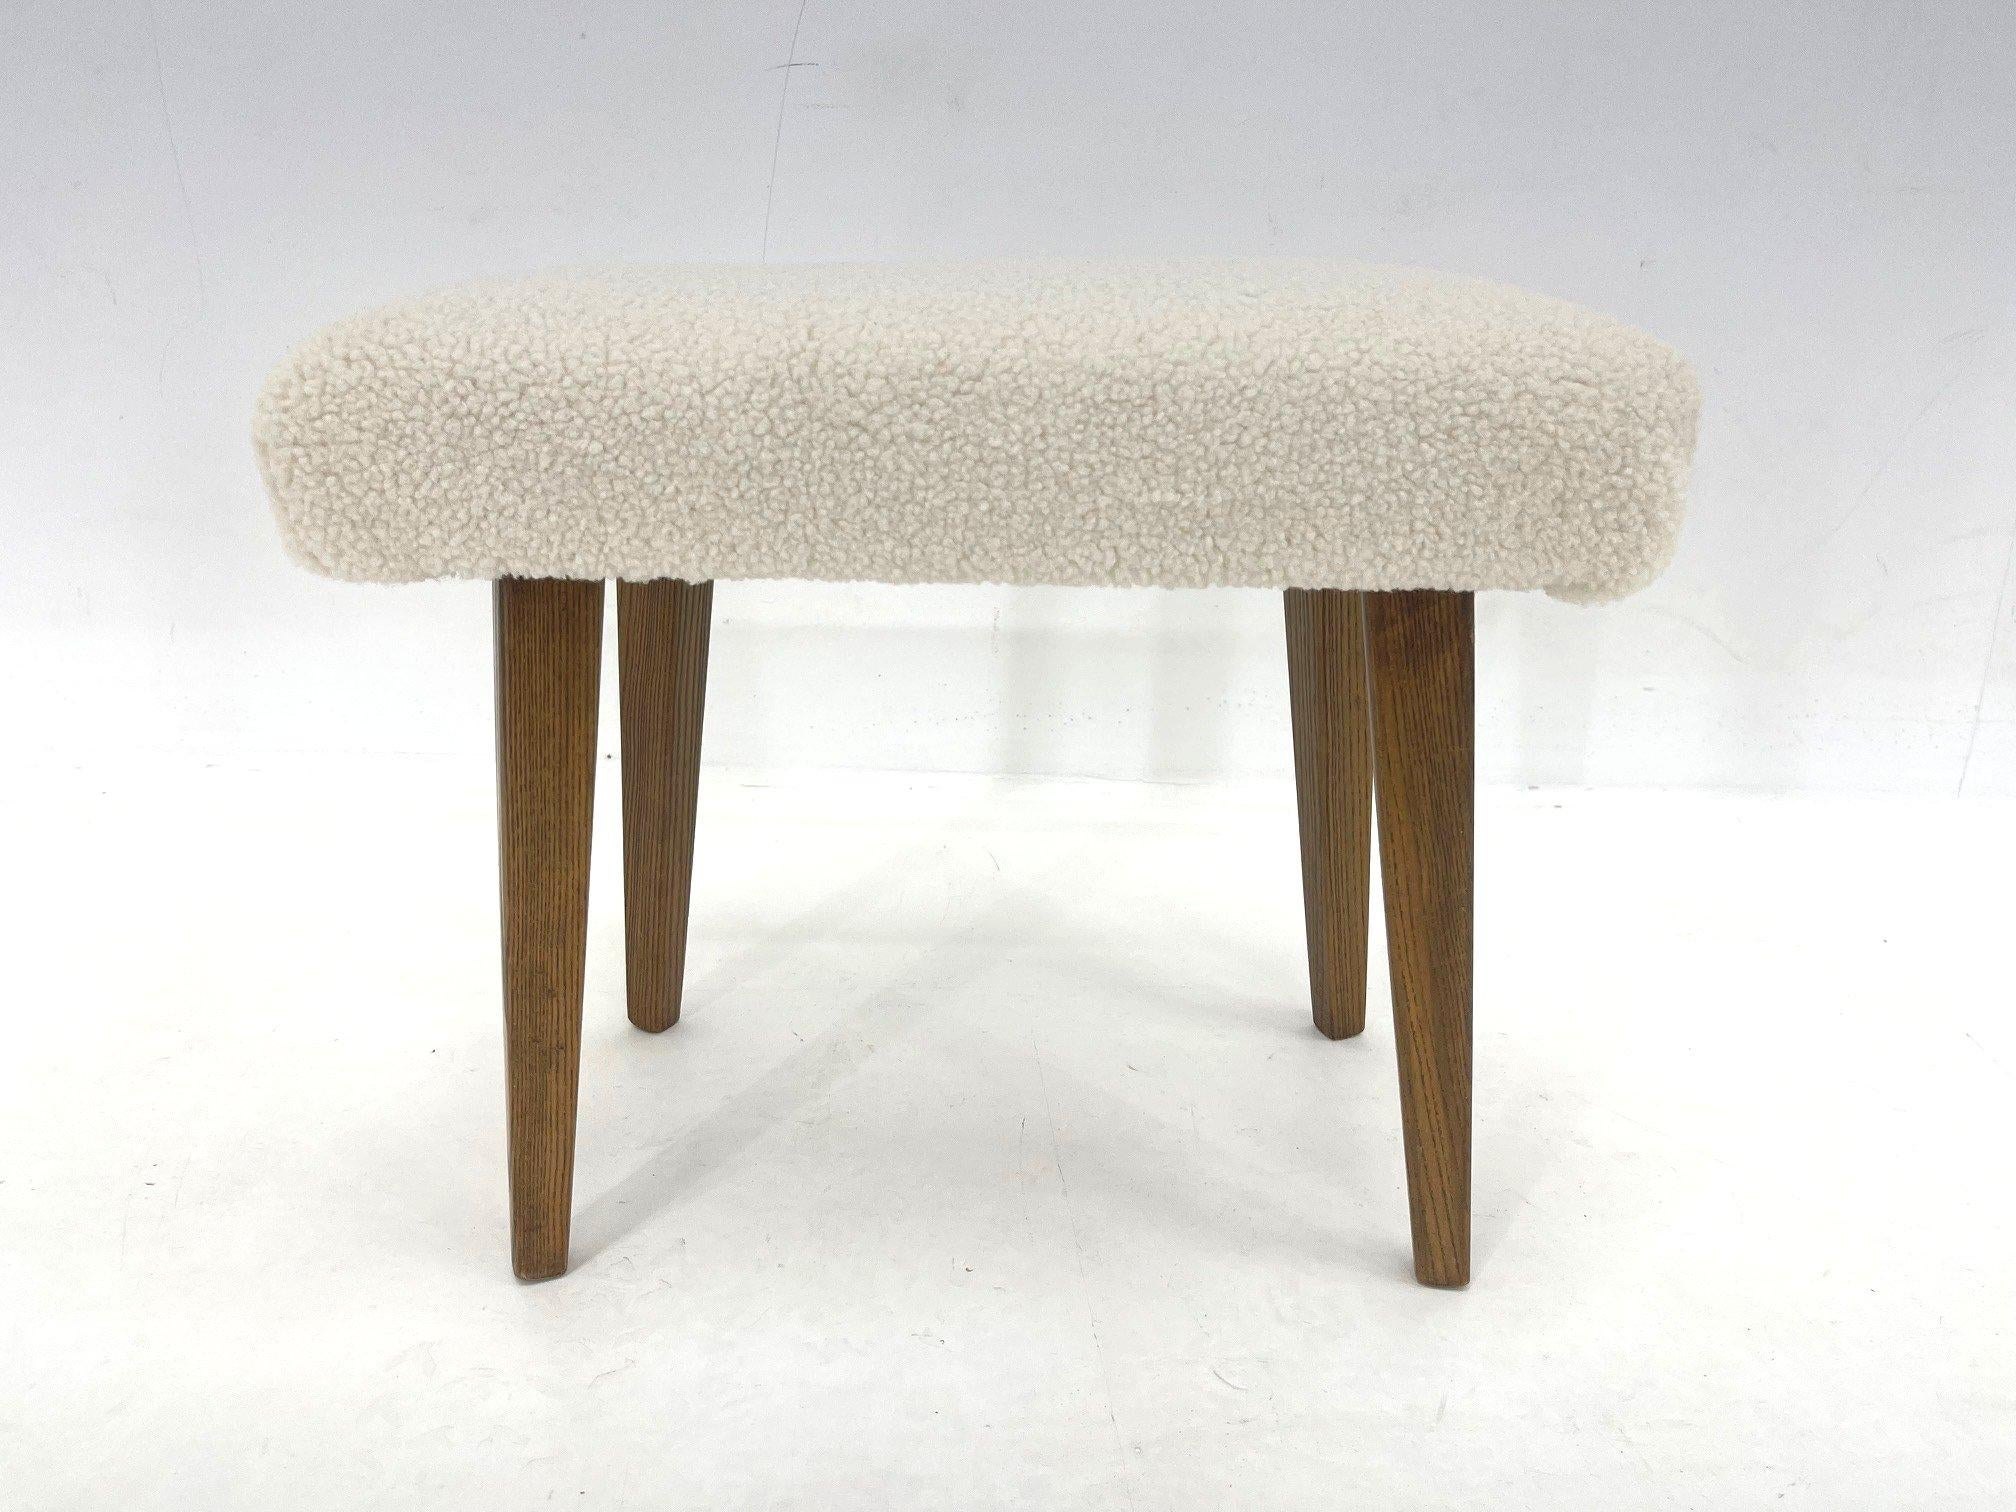 Vintage stool made in former Czechoslovakia in the 1960's. Newly upholstered in sheep skin fabric. The wooden parts were carefully refurbished.